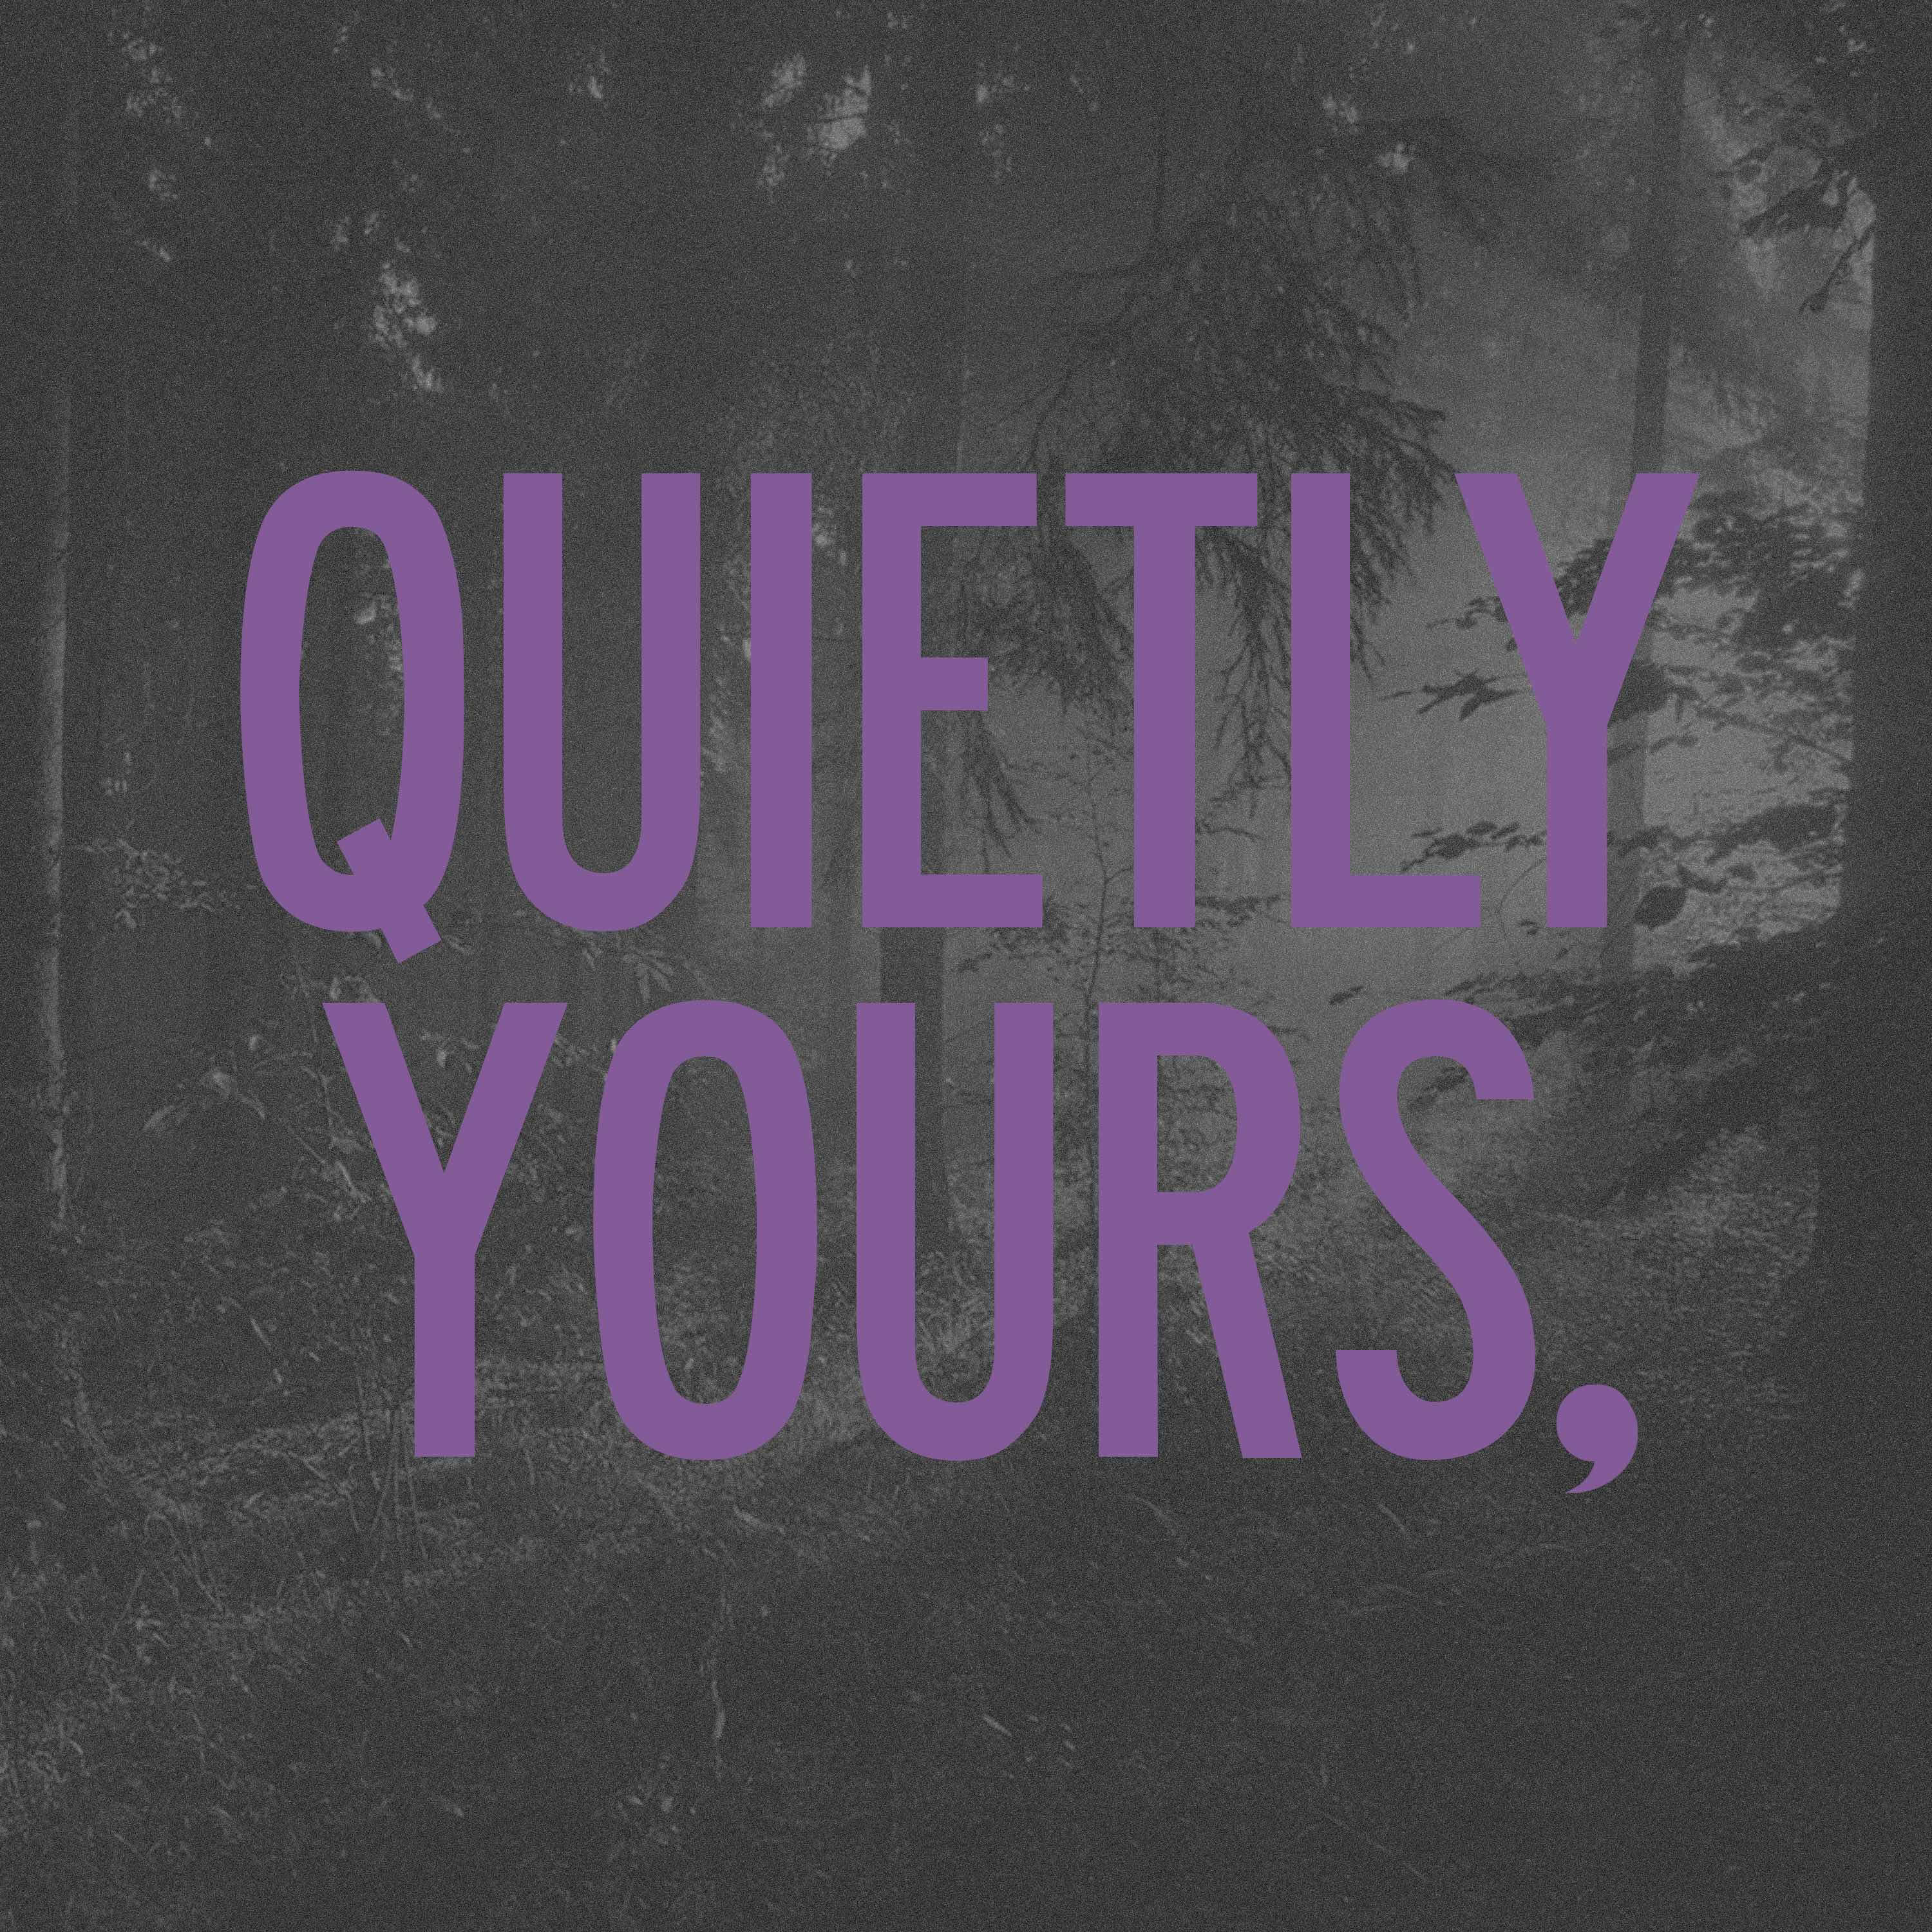 Quietly Yours